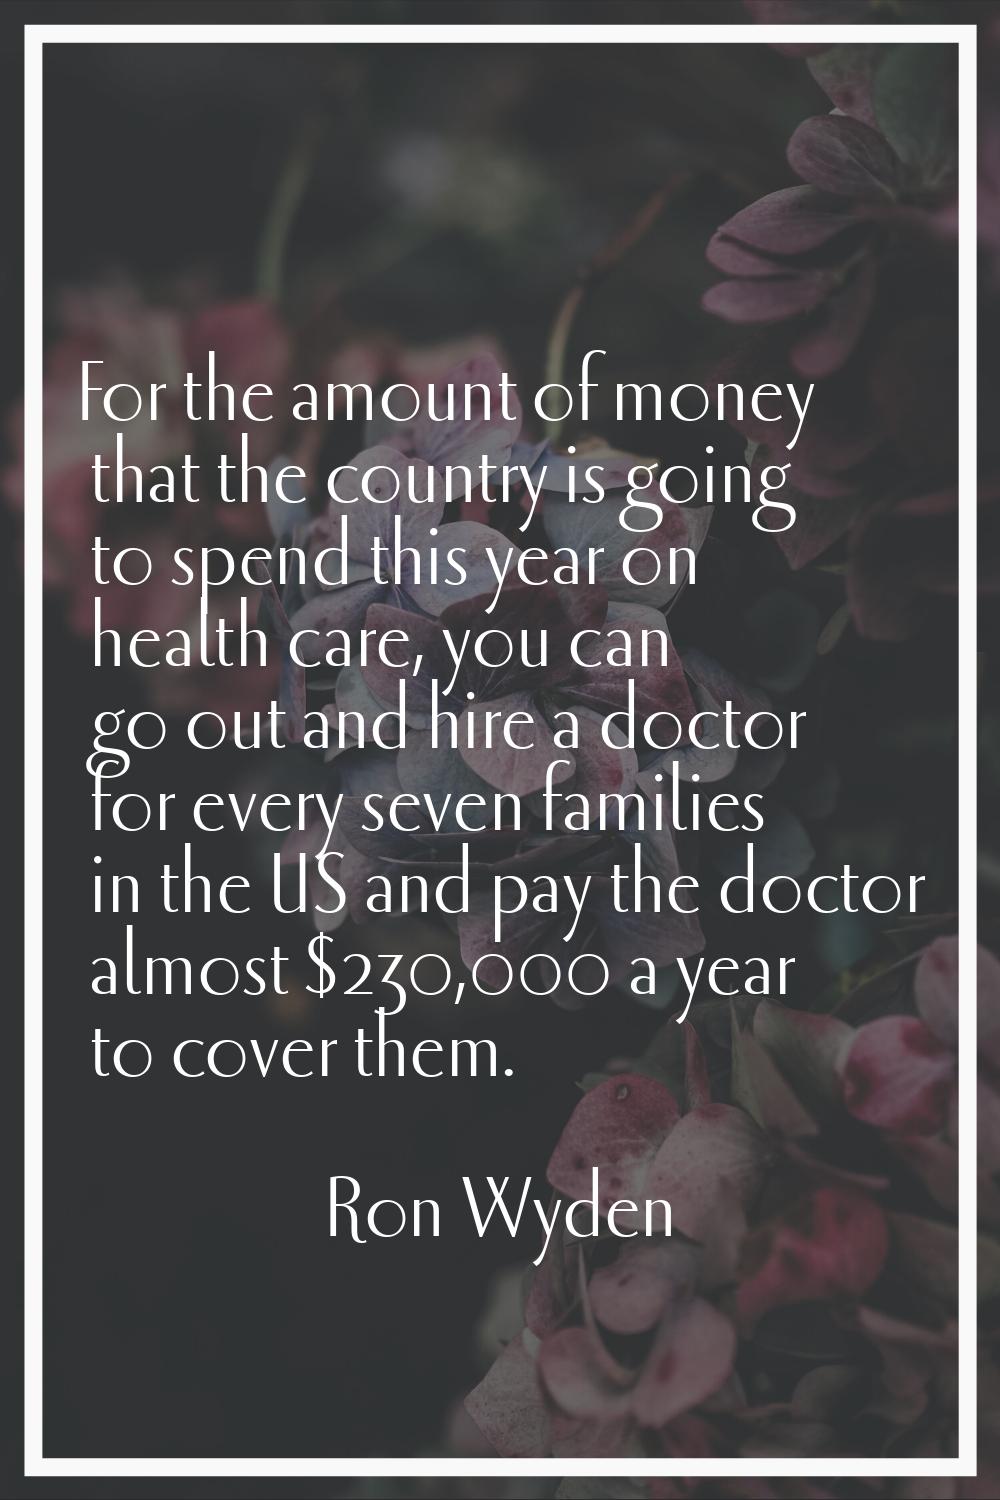 For the amount of money that the country is going to spend this year on health care, you can go out